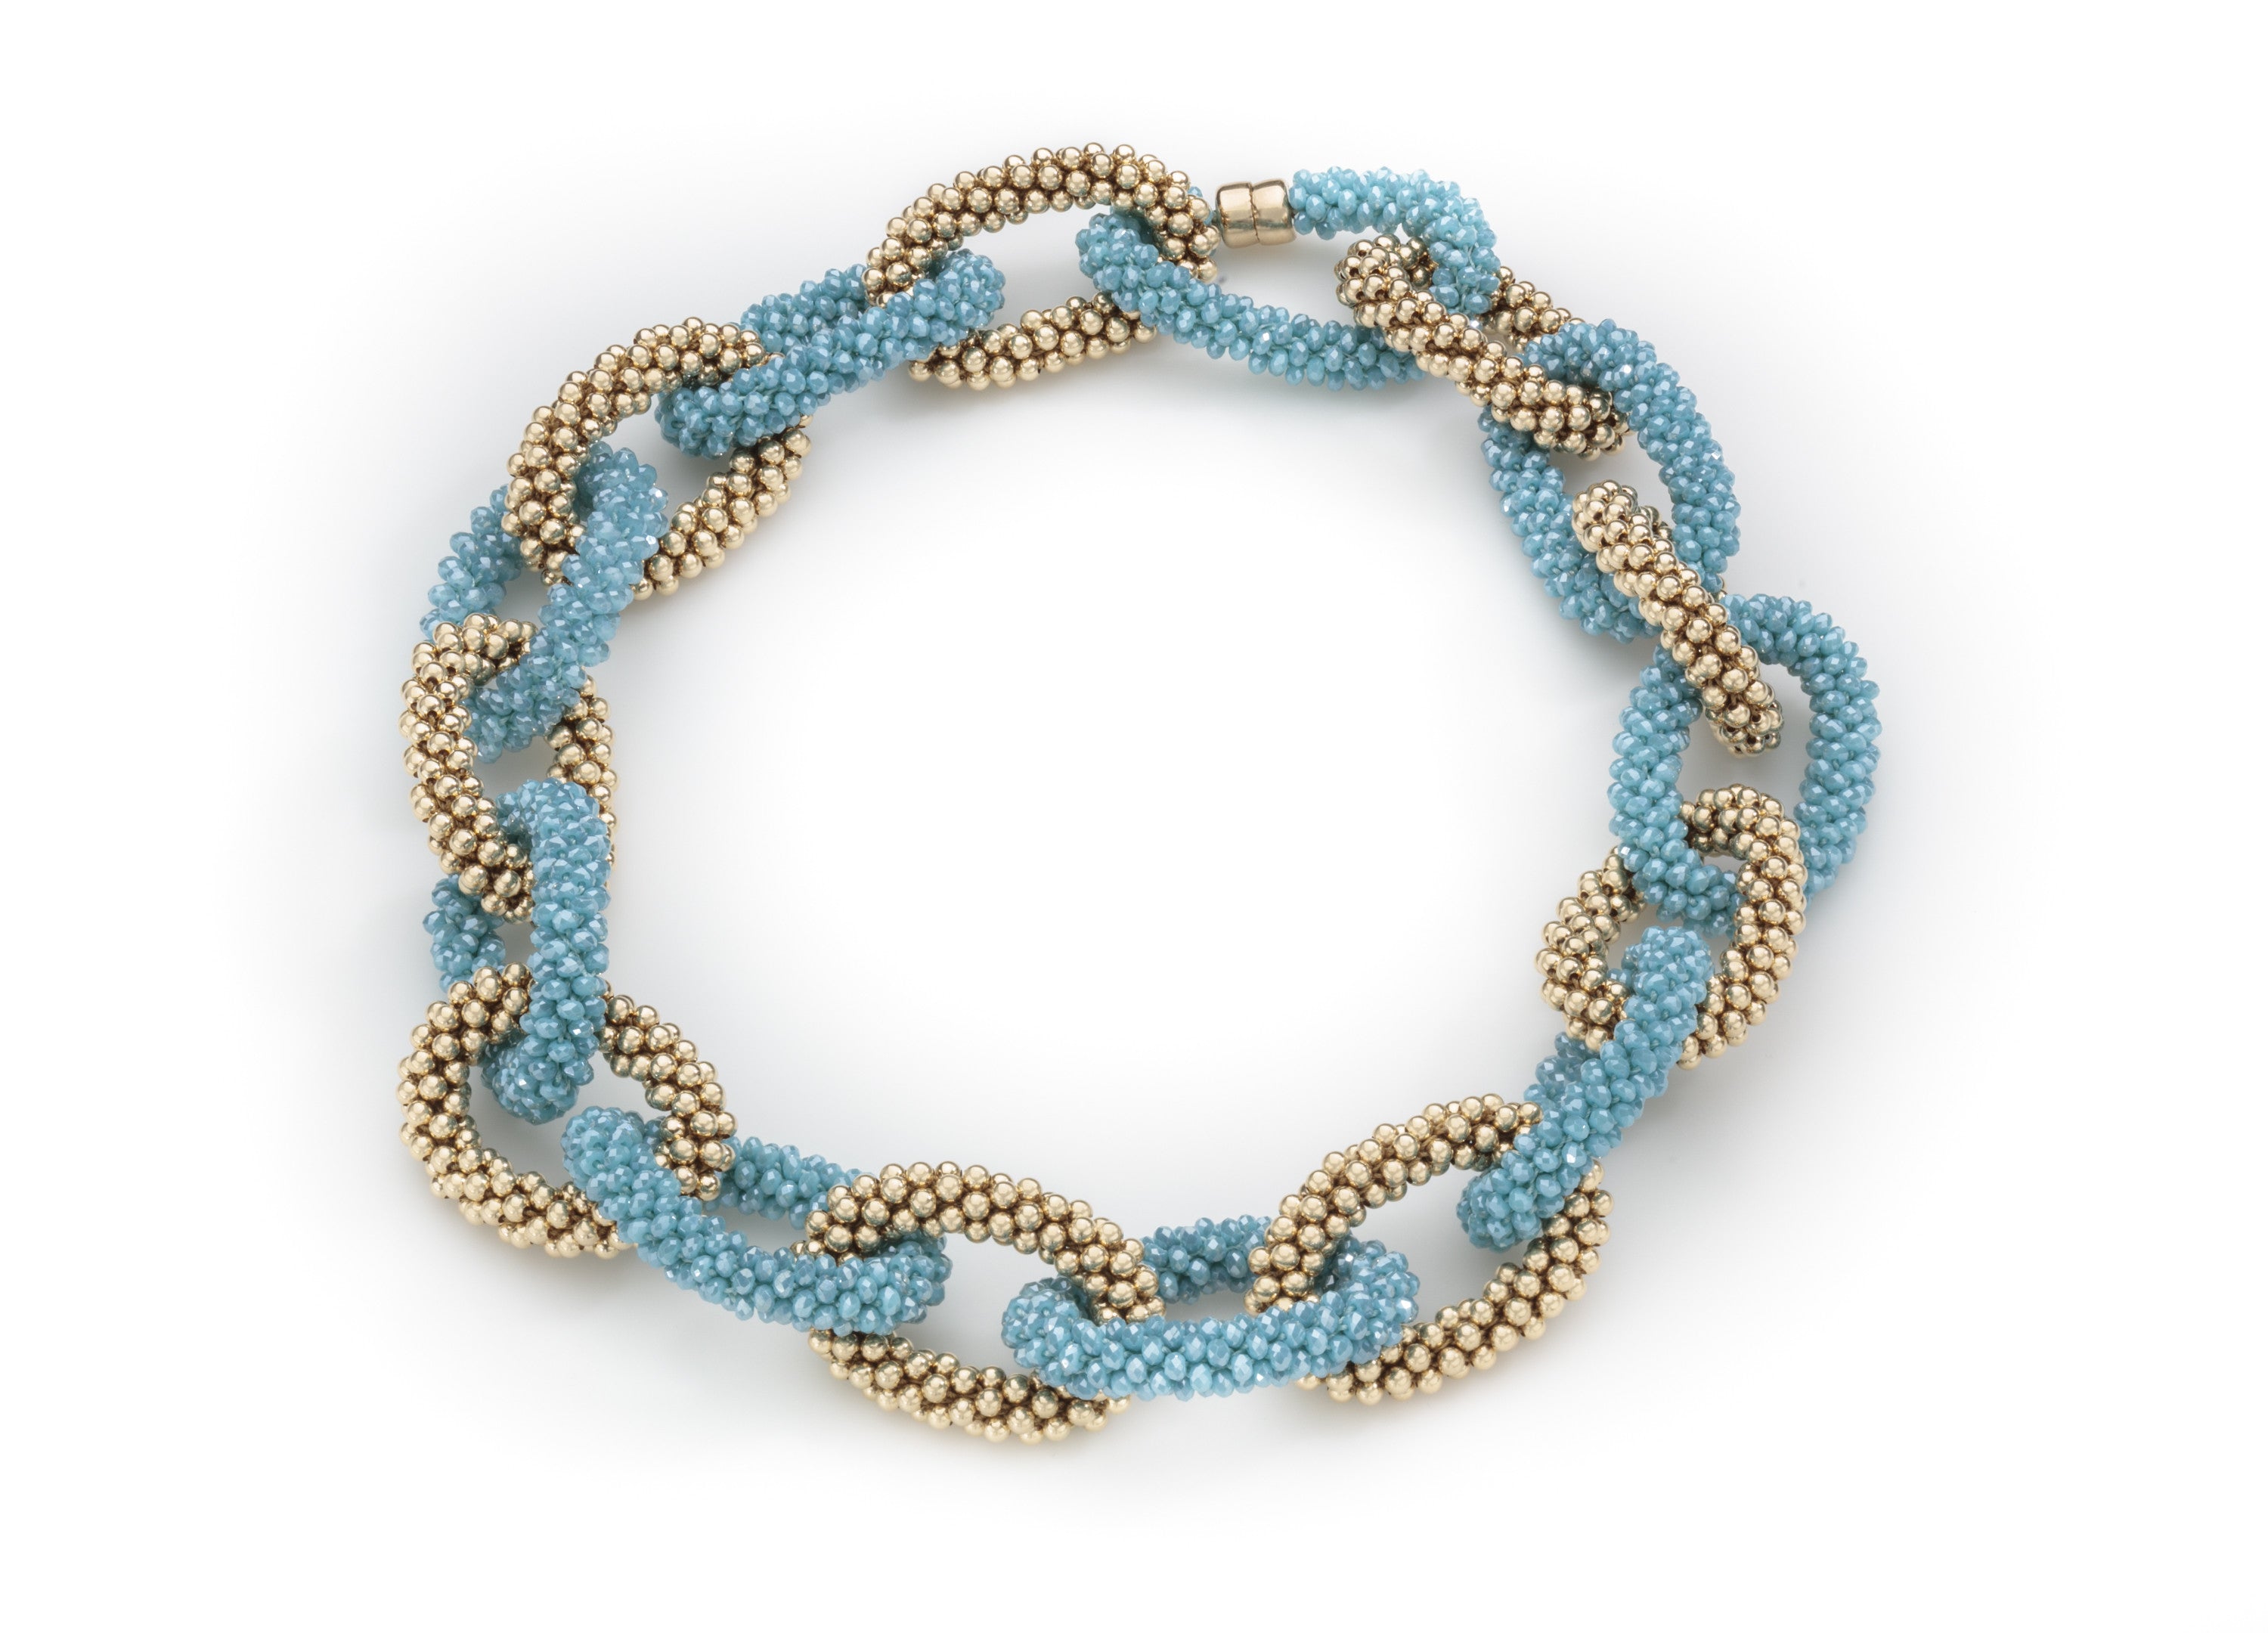 A Turquoise Crystal and Gold Linkable Necklace